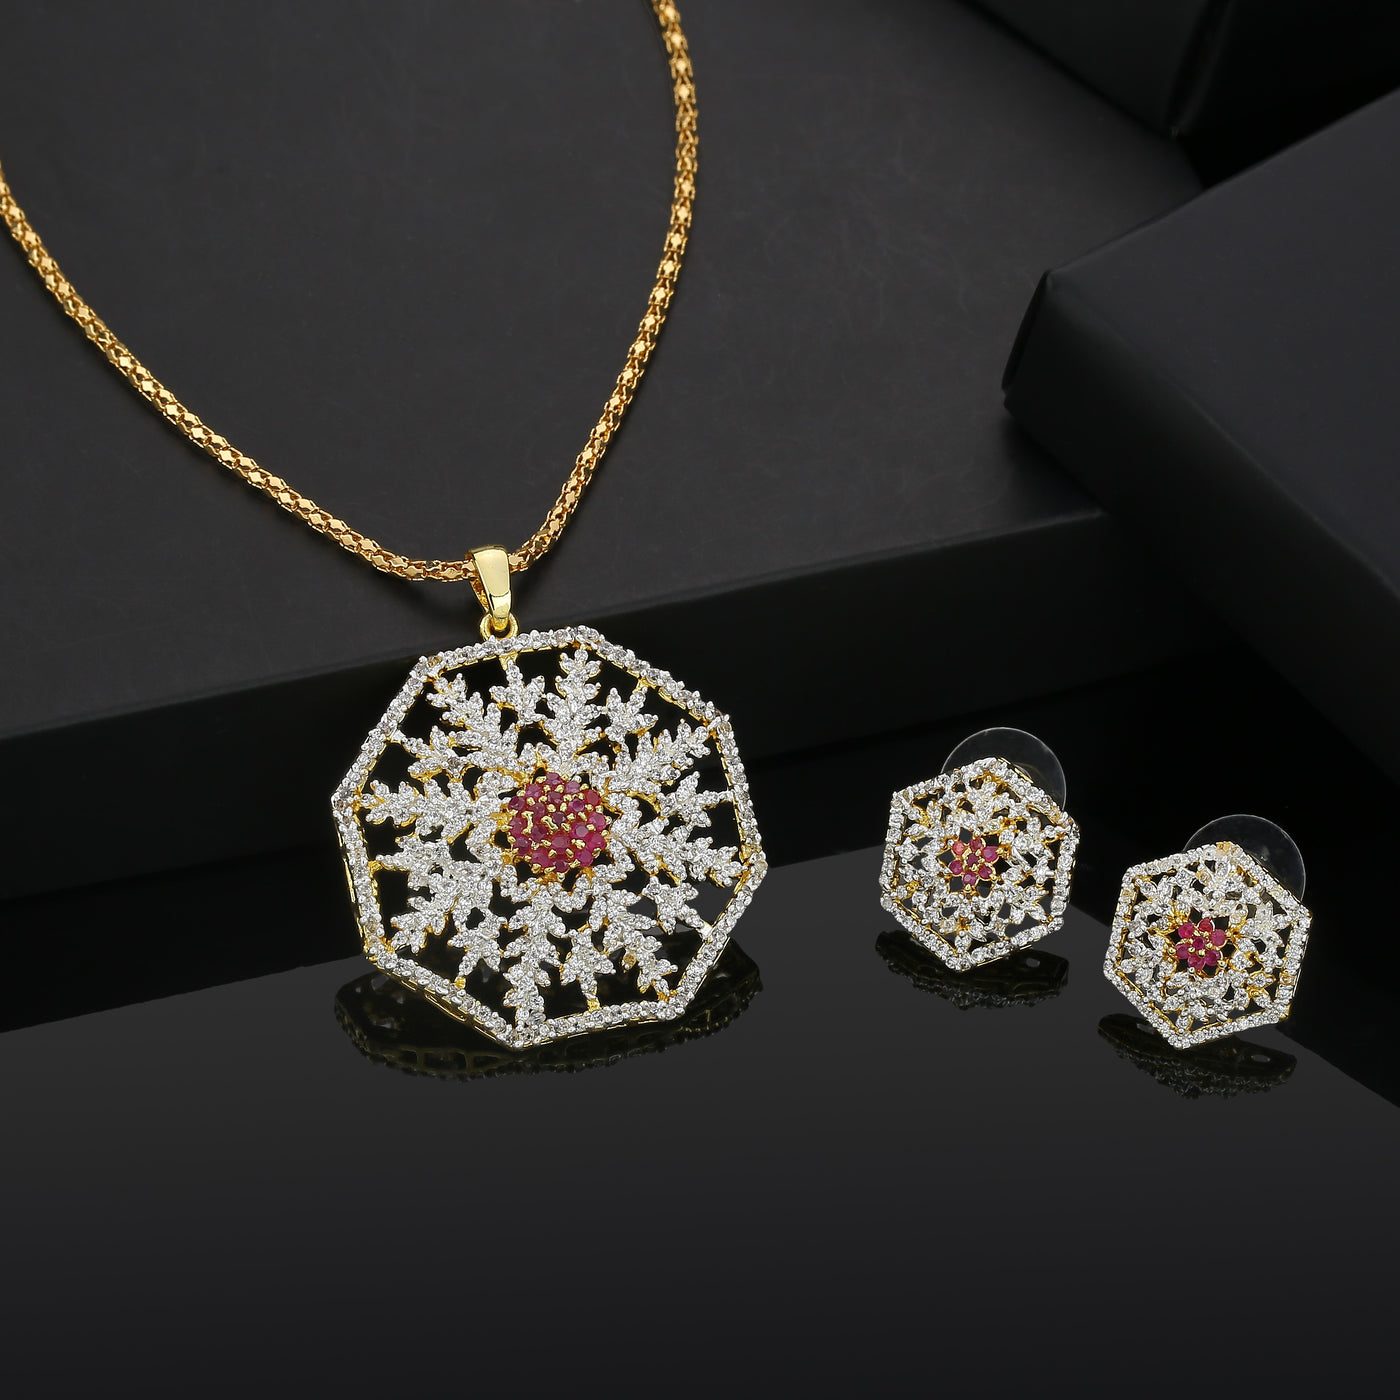 Estele - 24 KT gold plated pendant set with American Diamonds and Ruby Stones for Women